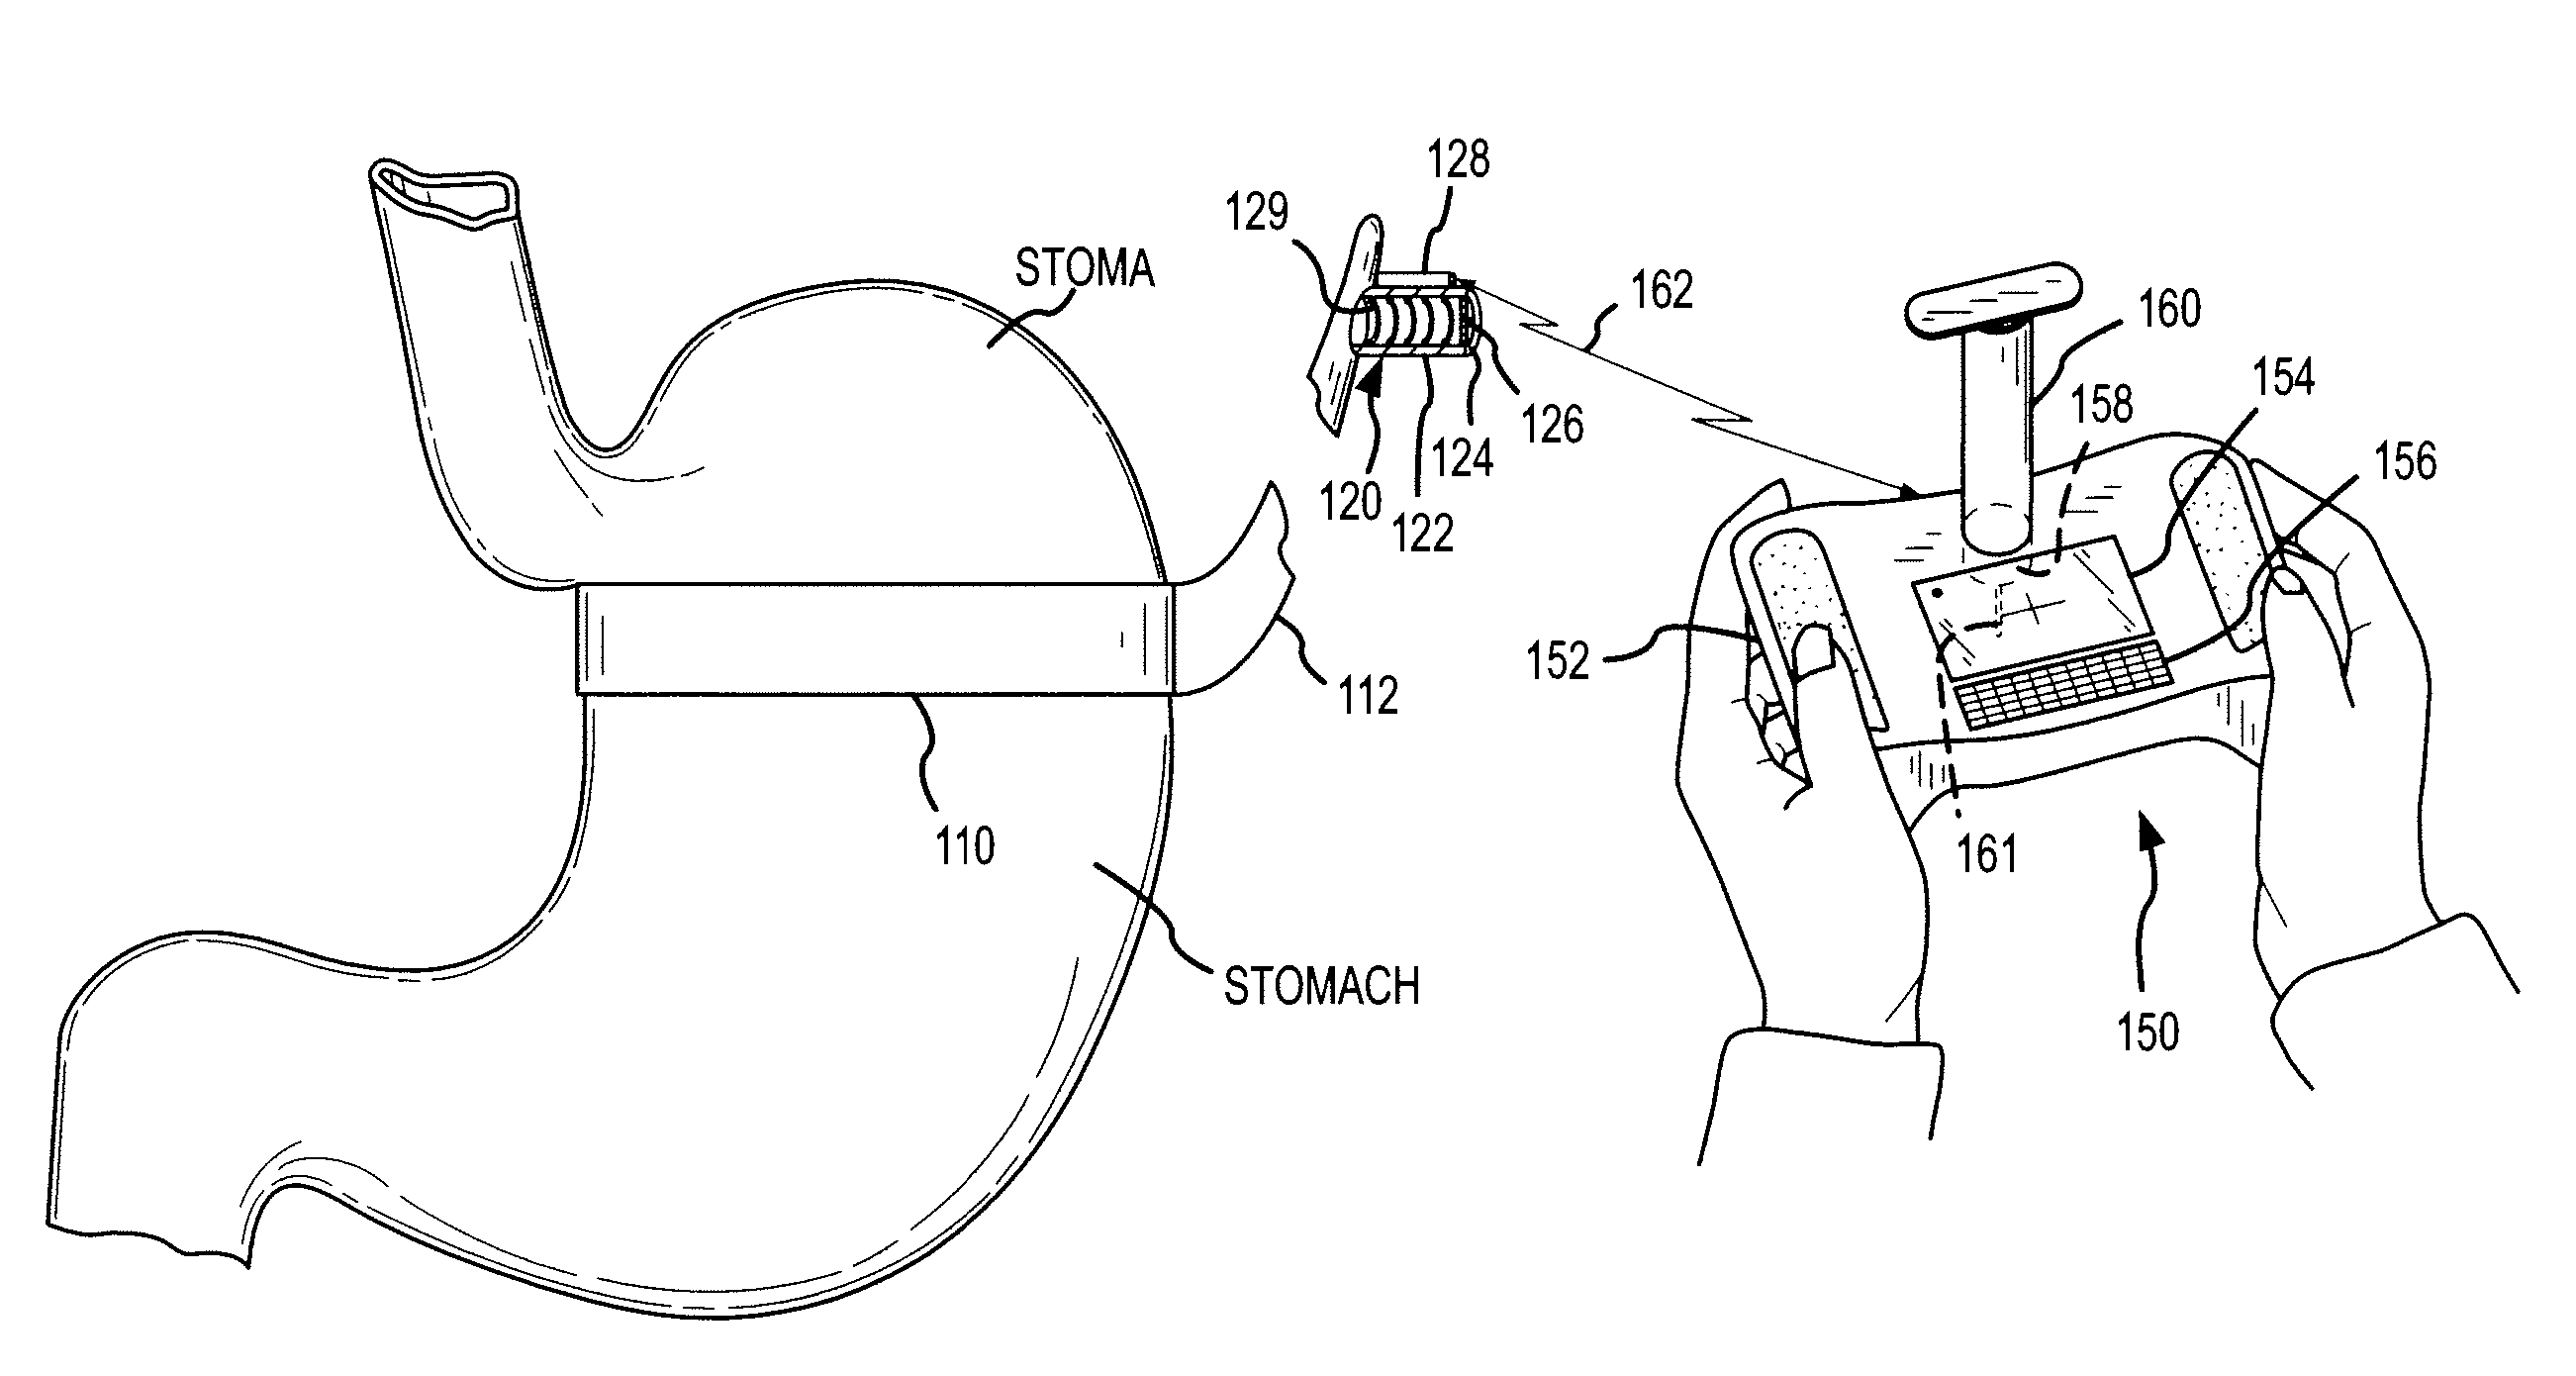 Method for locating an implanted fluid access port